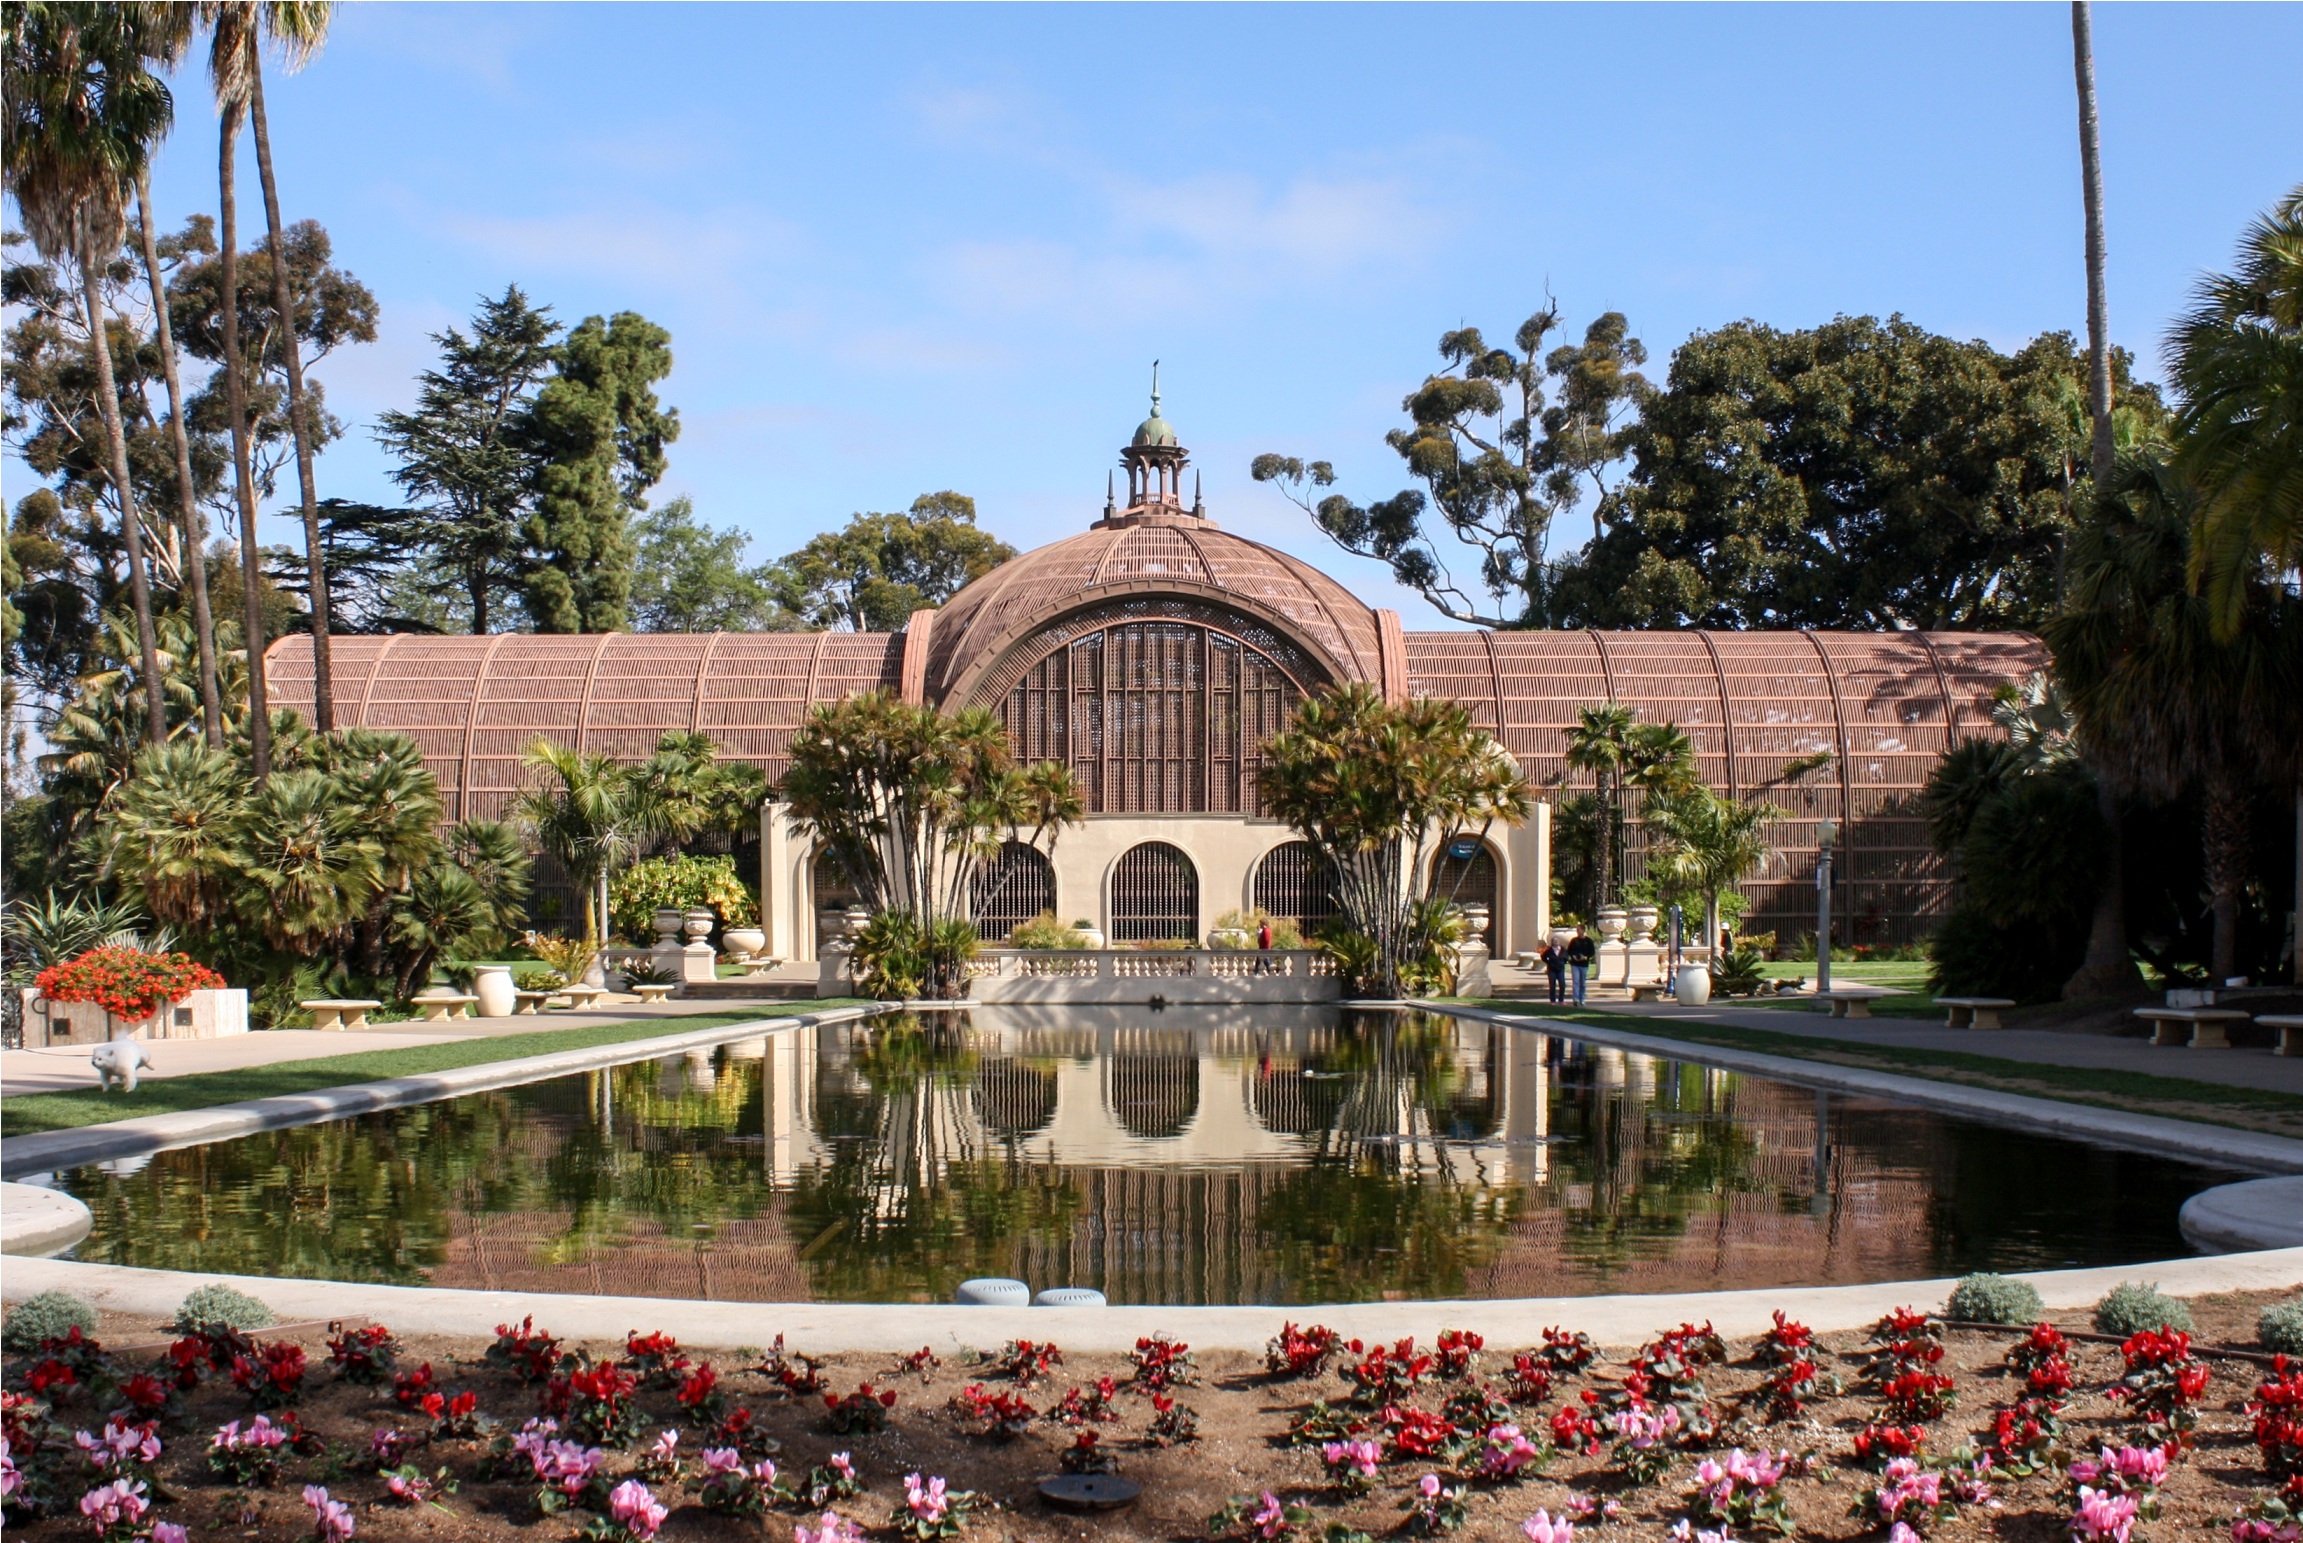 Balboa Park, The Largest National Cultural Park in San Diego